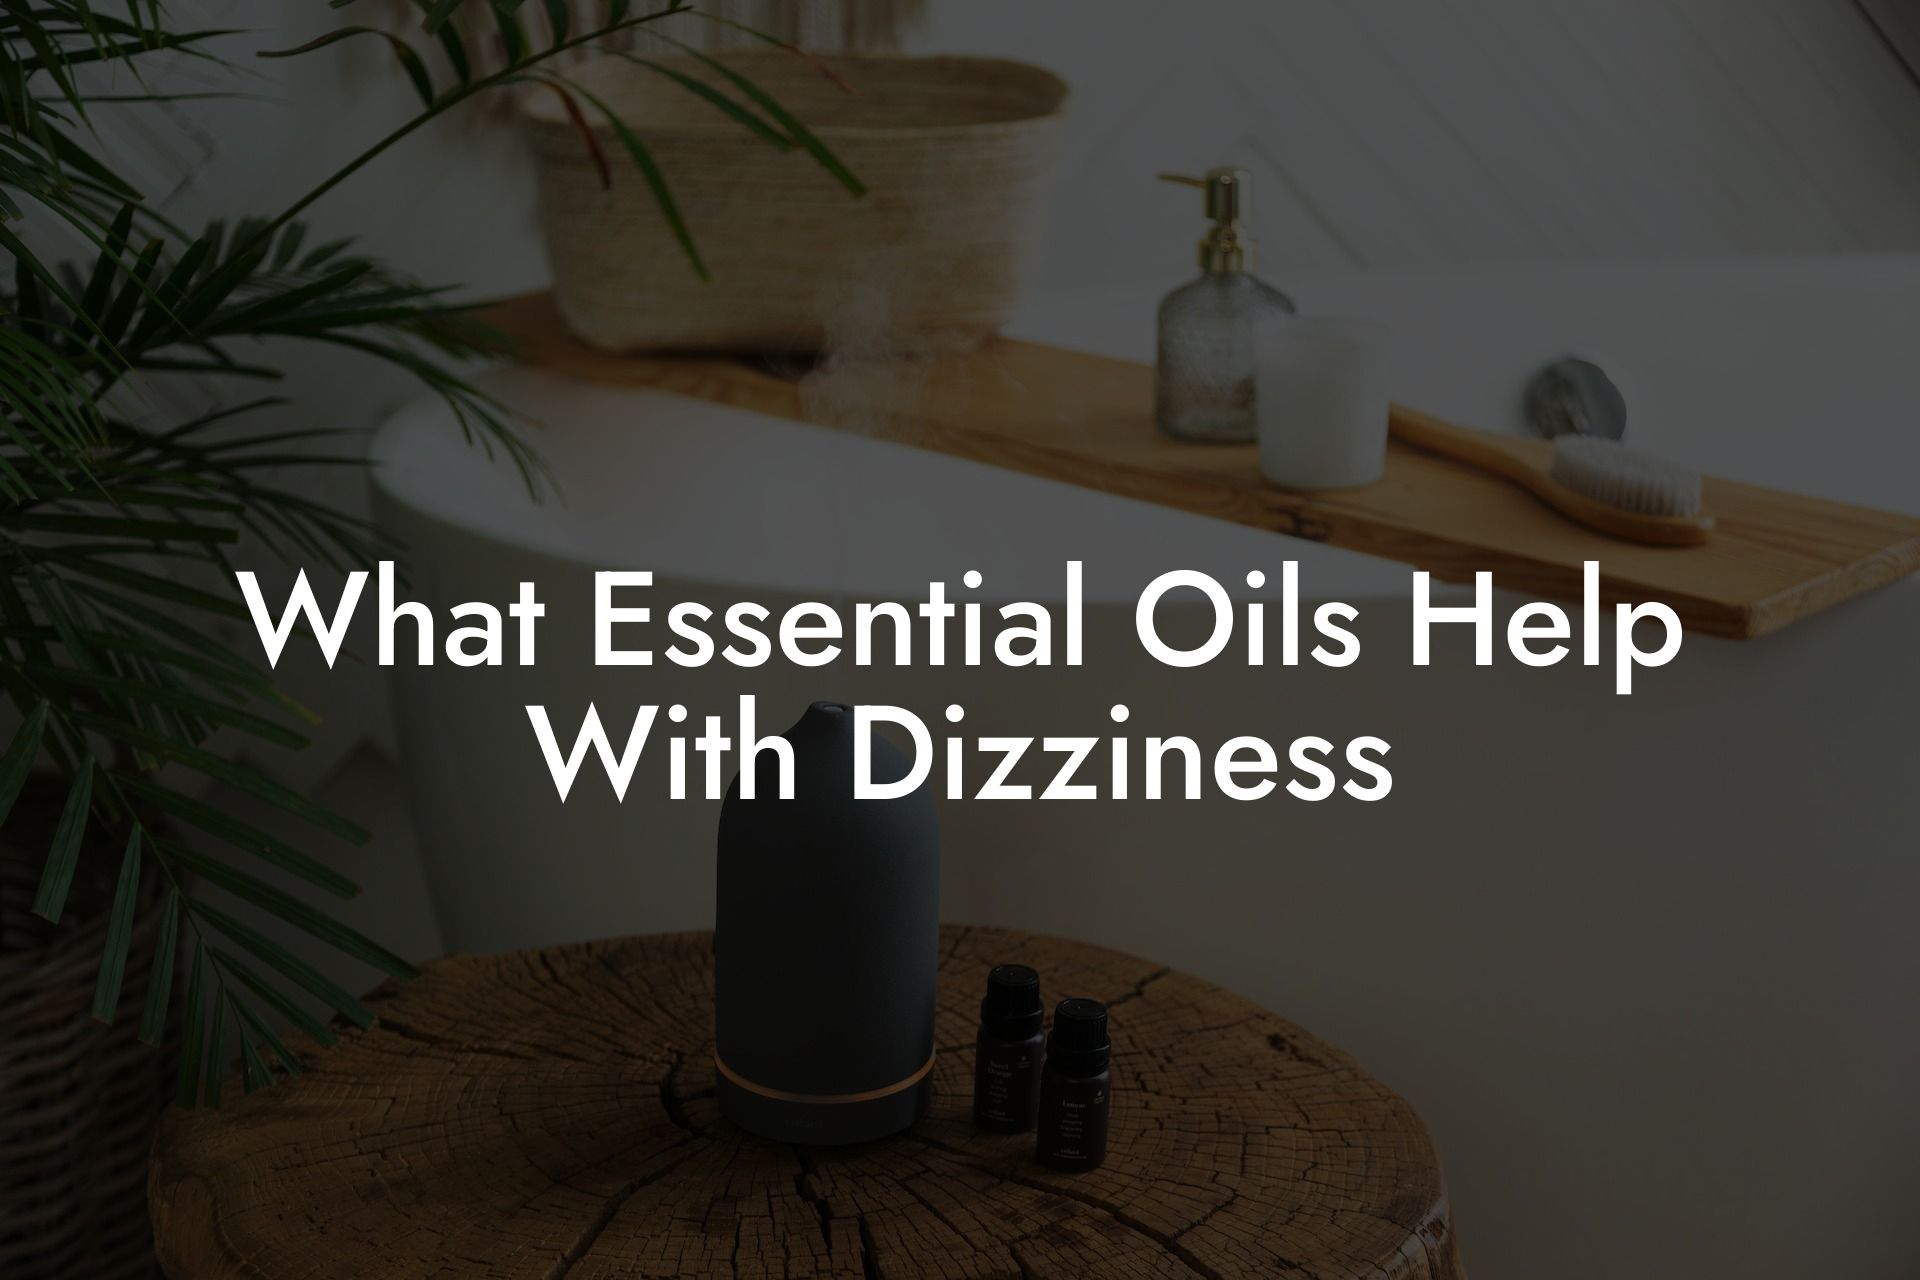 What Essential Oils Help With Dizziness